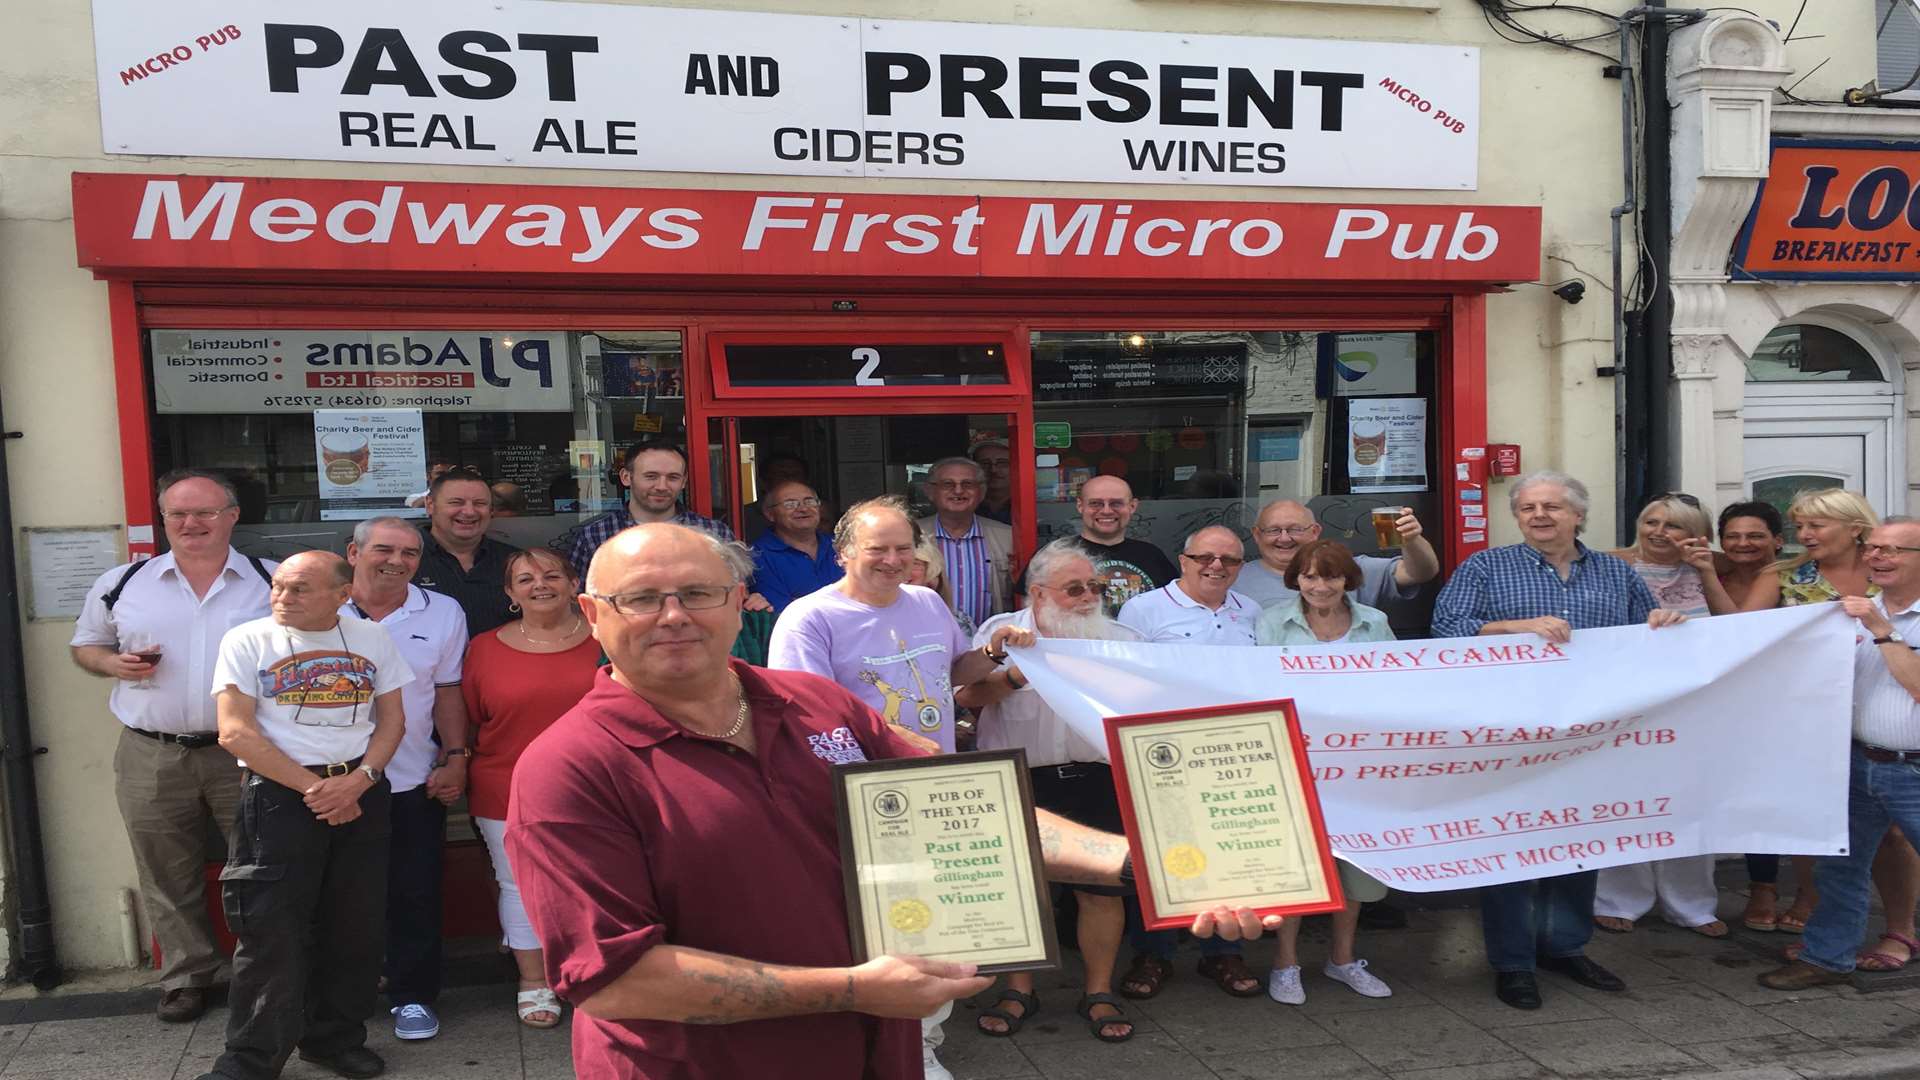 Past and Present micropub landlord Dave Hallowell shows off the awards from CAMRA for Medway's best pub and best cider pub